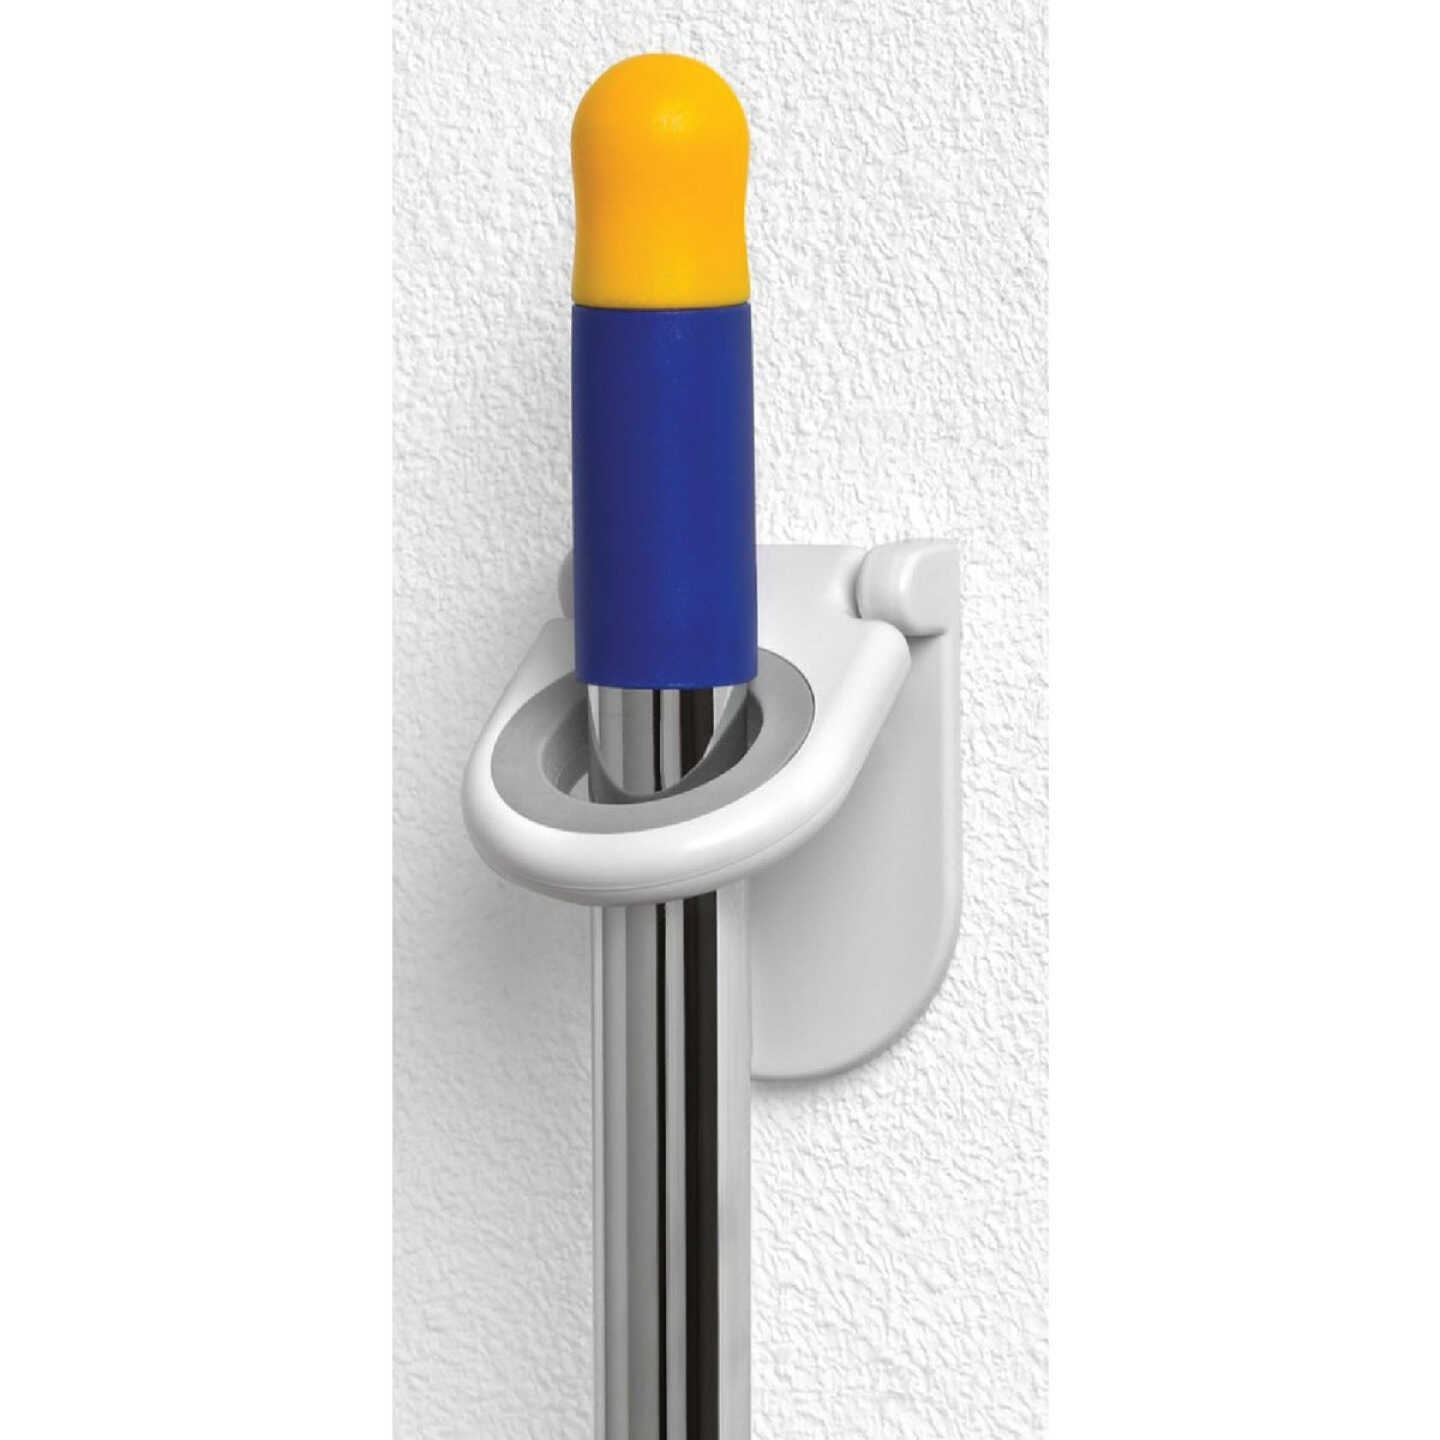 Spectrum Rubber Grip Mop and Broom Storage Hook - Power Townsend Company